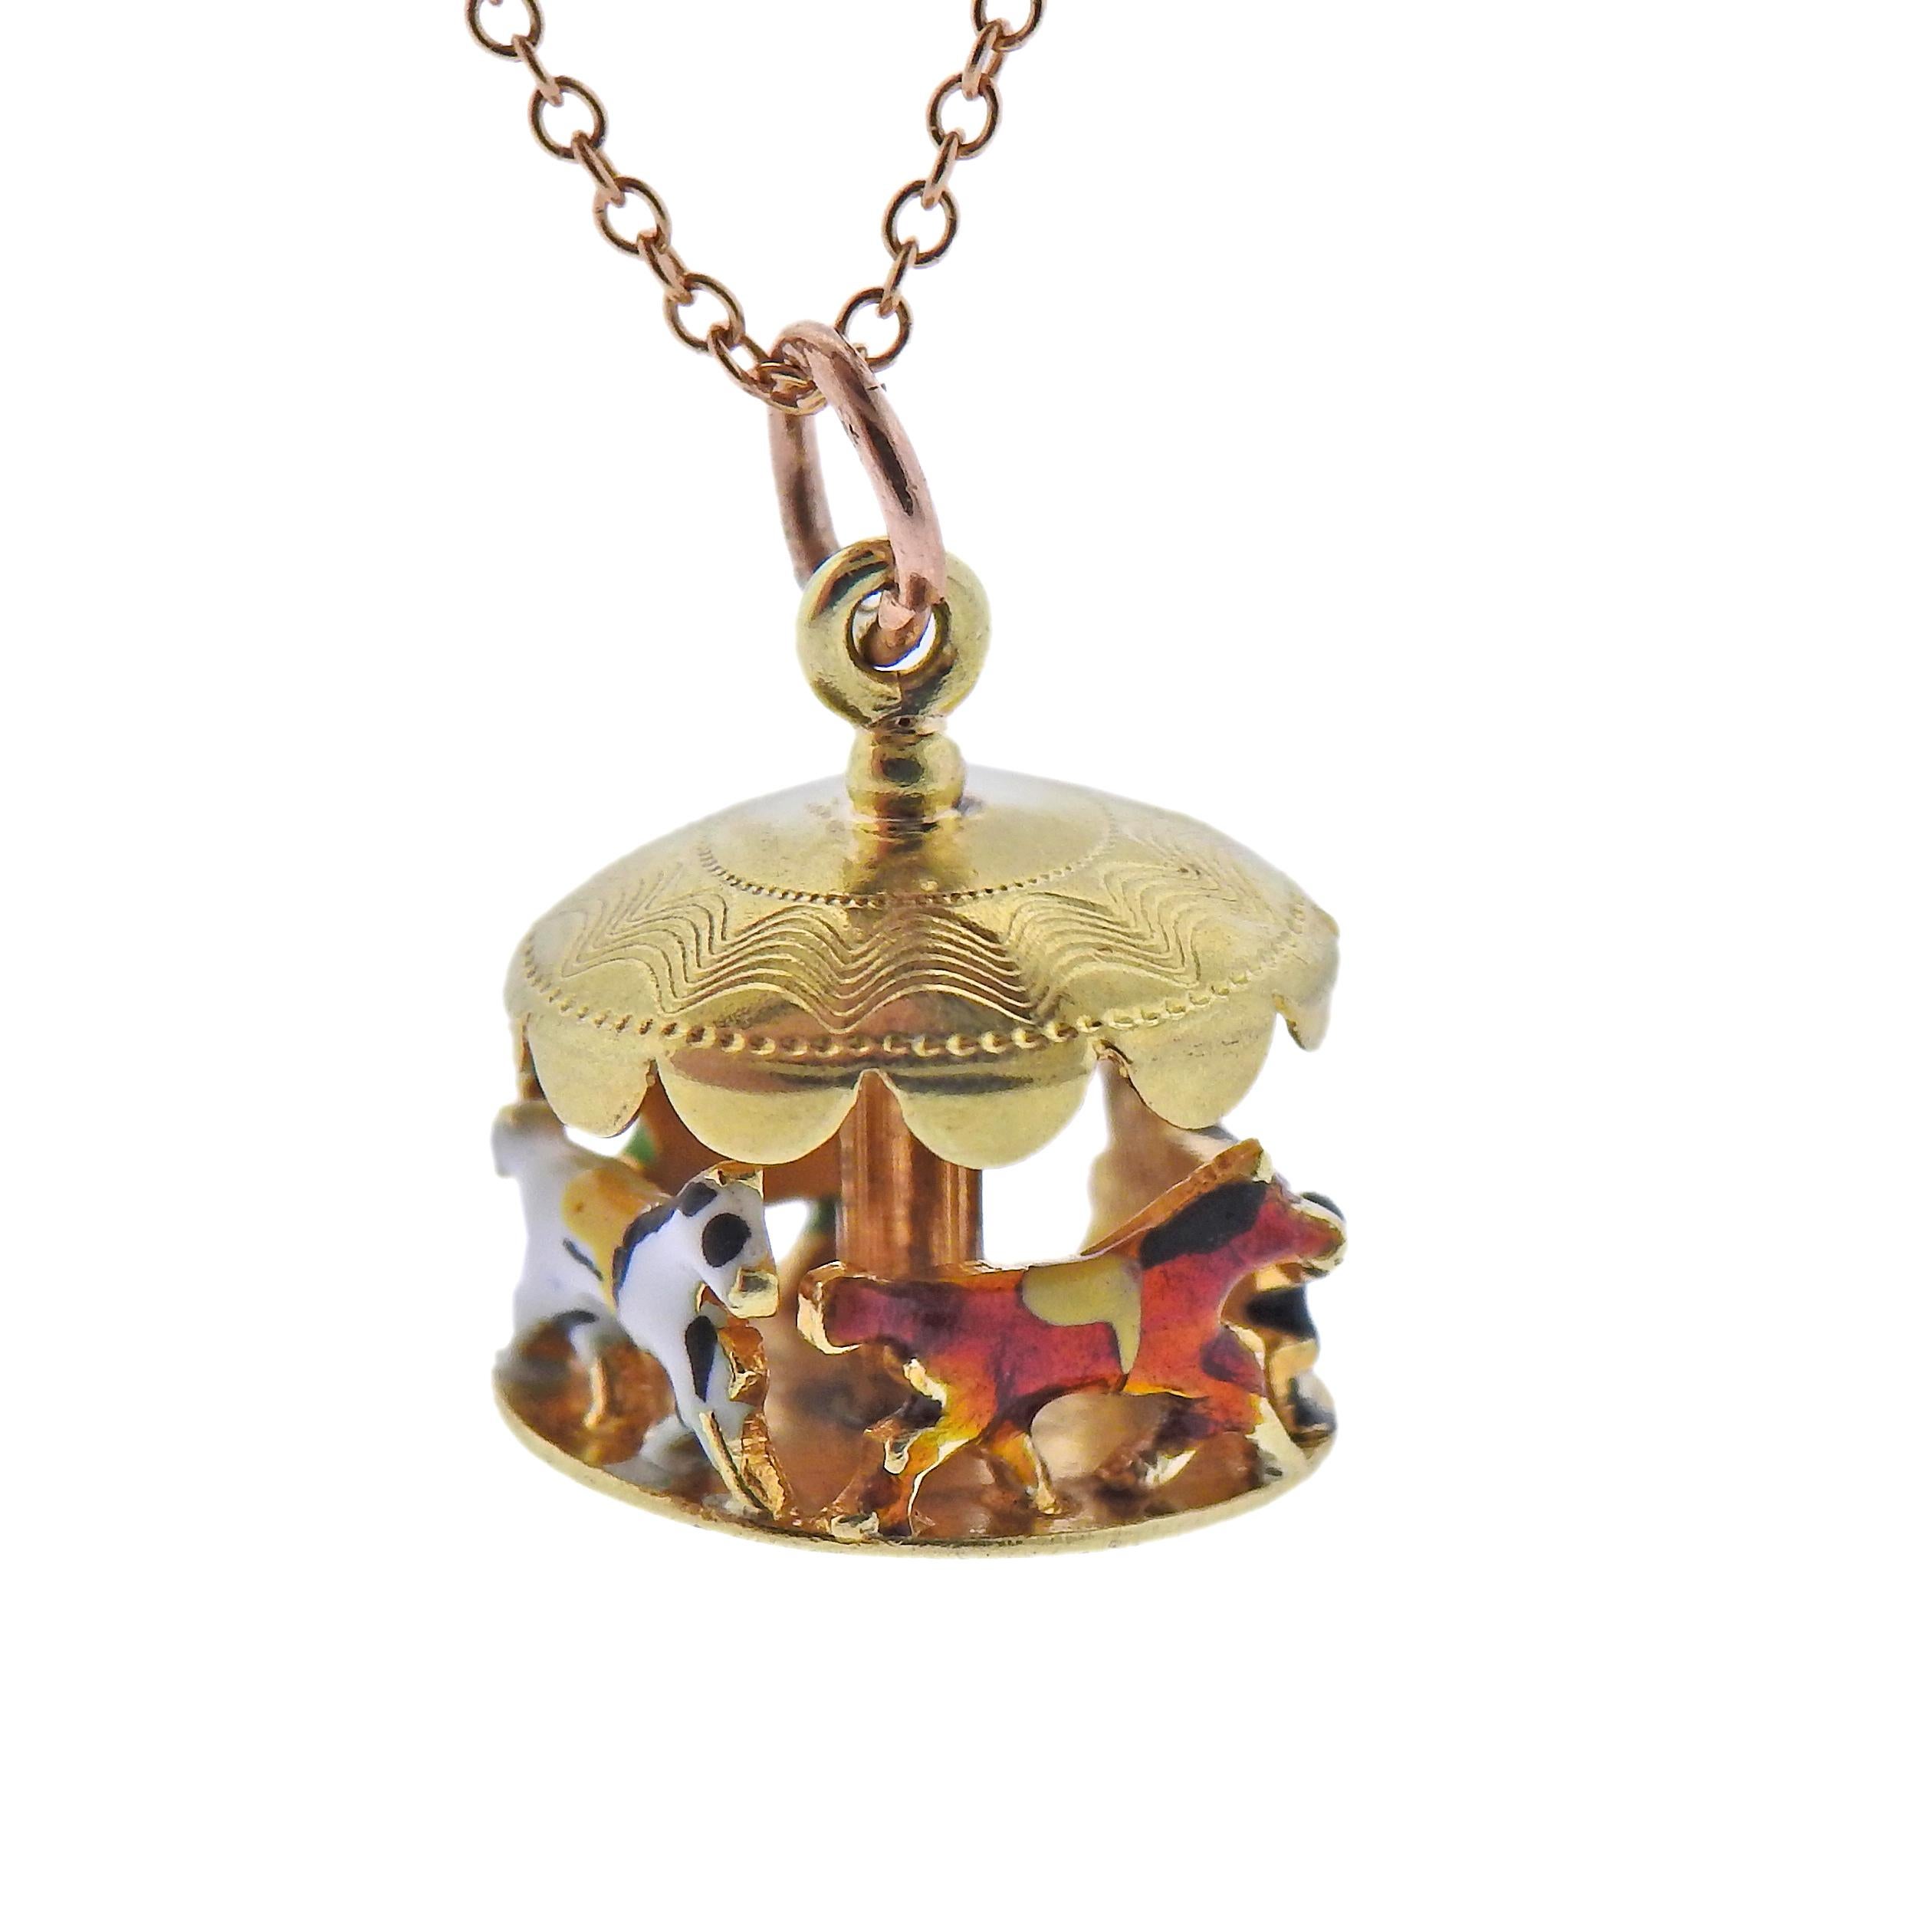 18k yellow gold Tiffany & Co chain necklace, with a 14k gold enamel decorated carousel charm. Necklace is 16